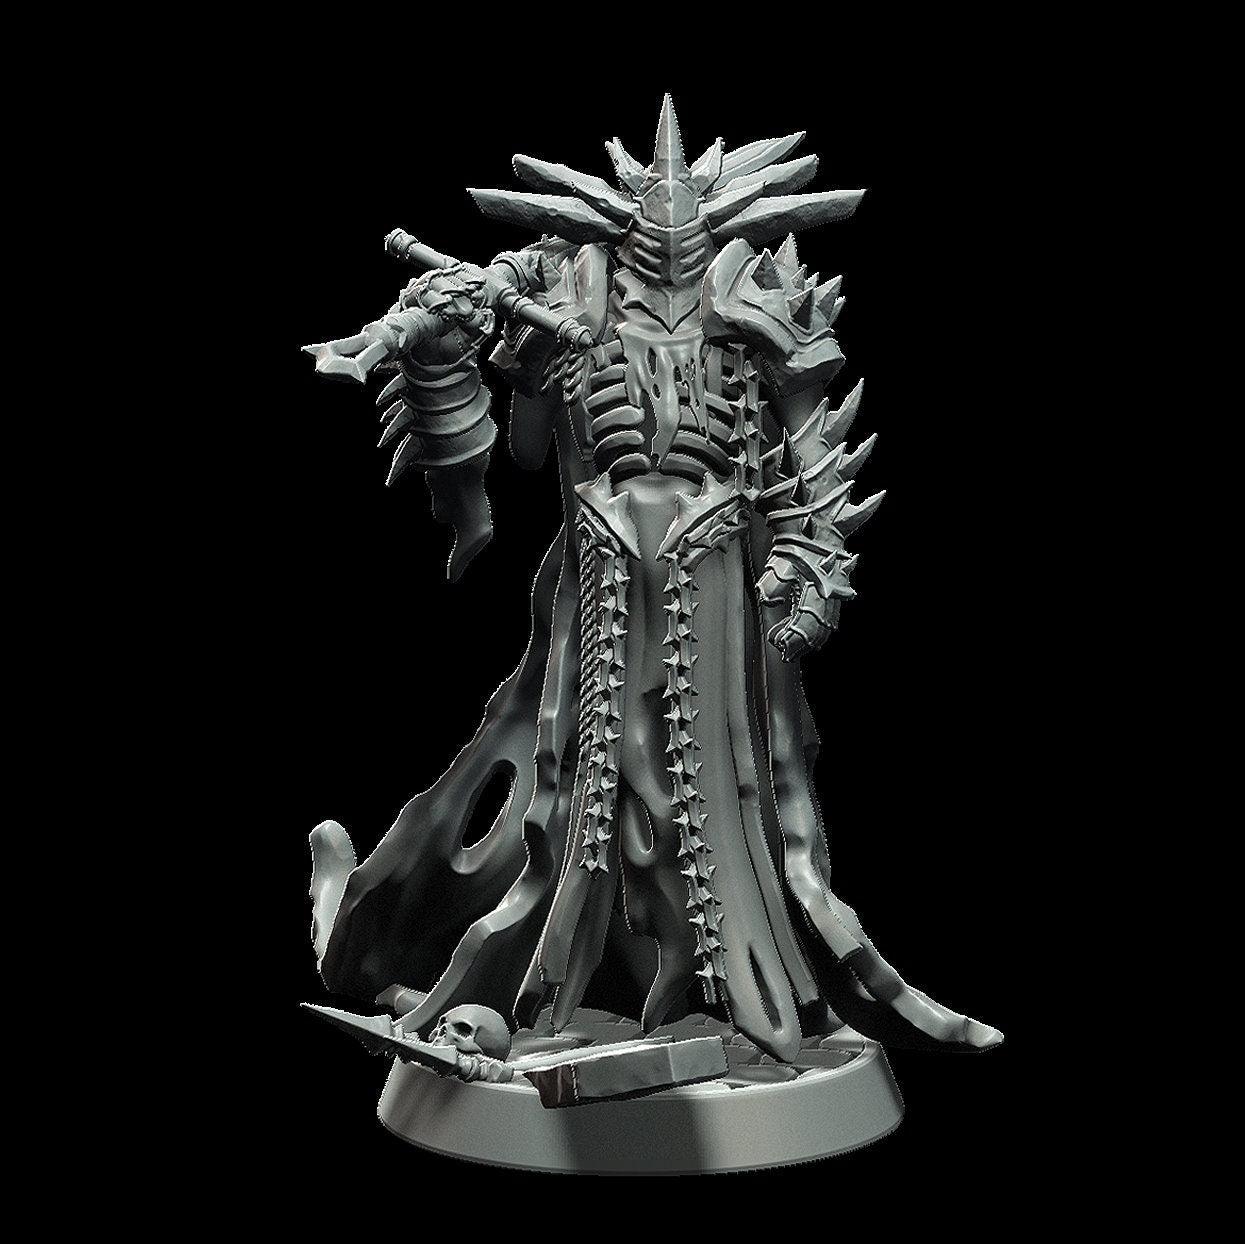 Vile Knight Miniature - 3 Poses - 28mm scale Tabletop gaming DnD Miniature Dungeons and Dragons dnd 5e - Plague Miniatures shop for DnD Miniatures